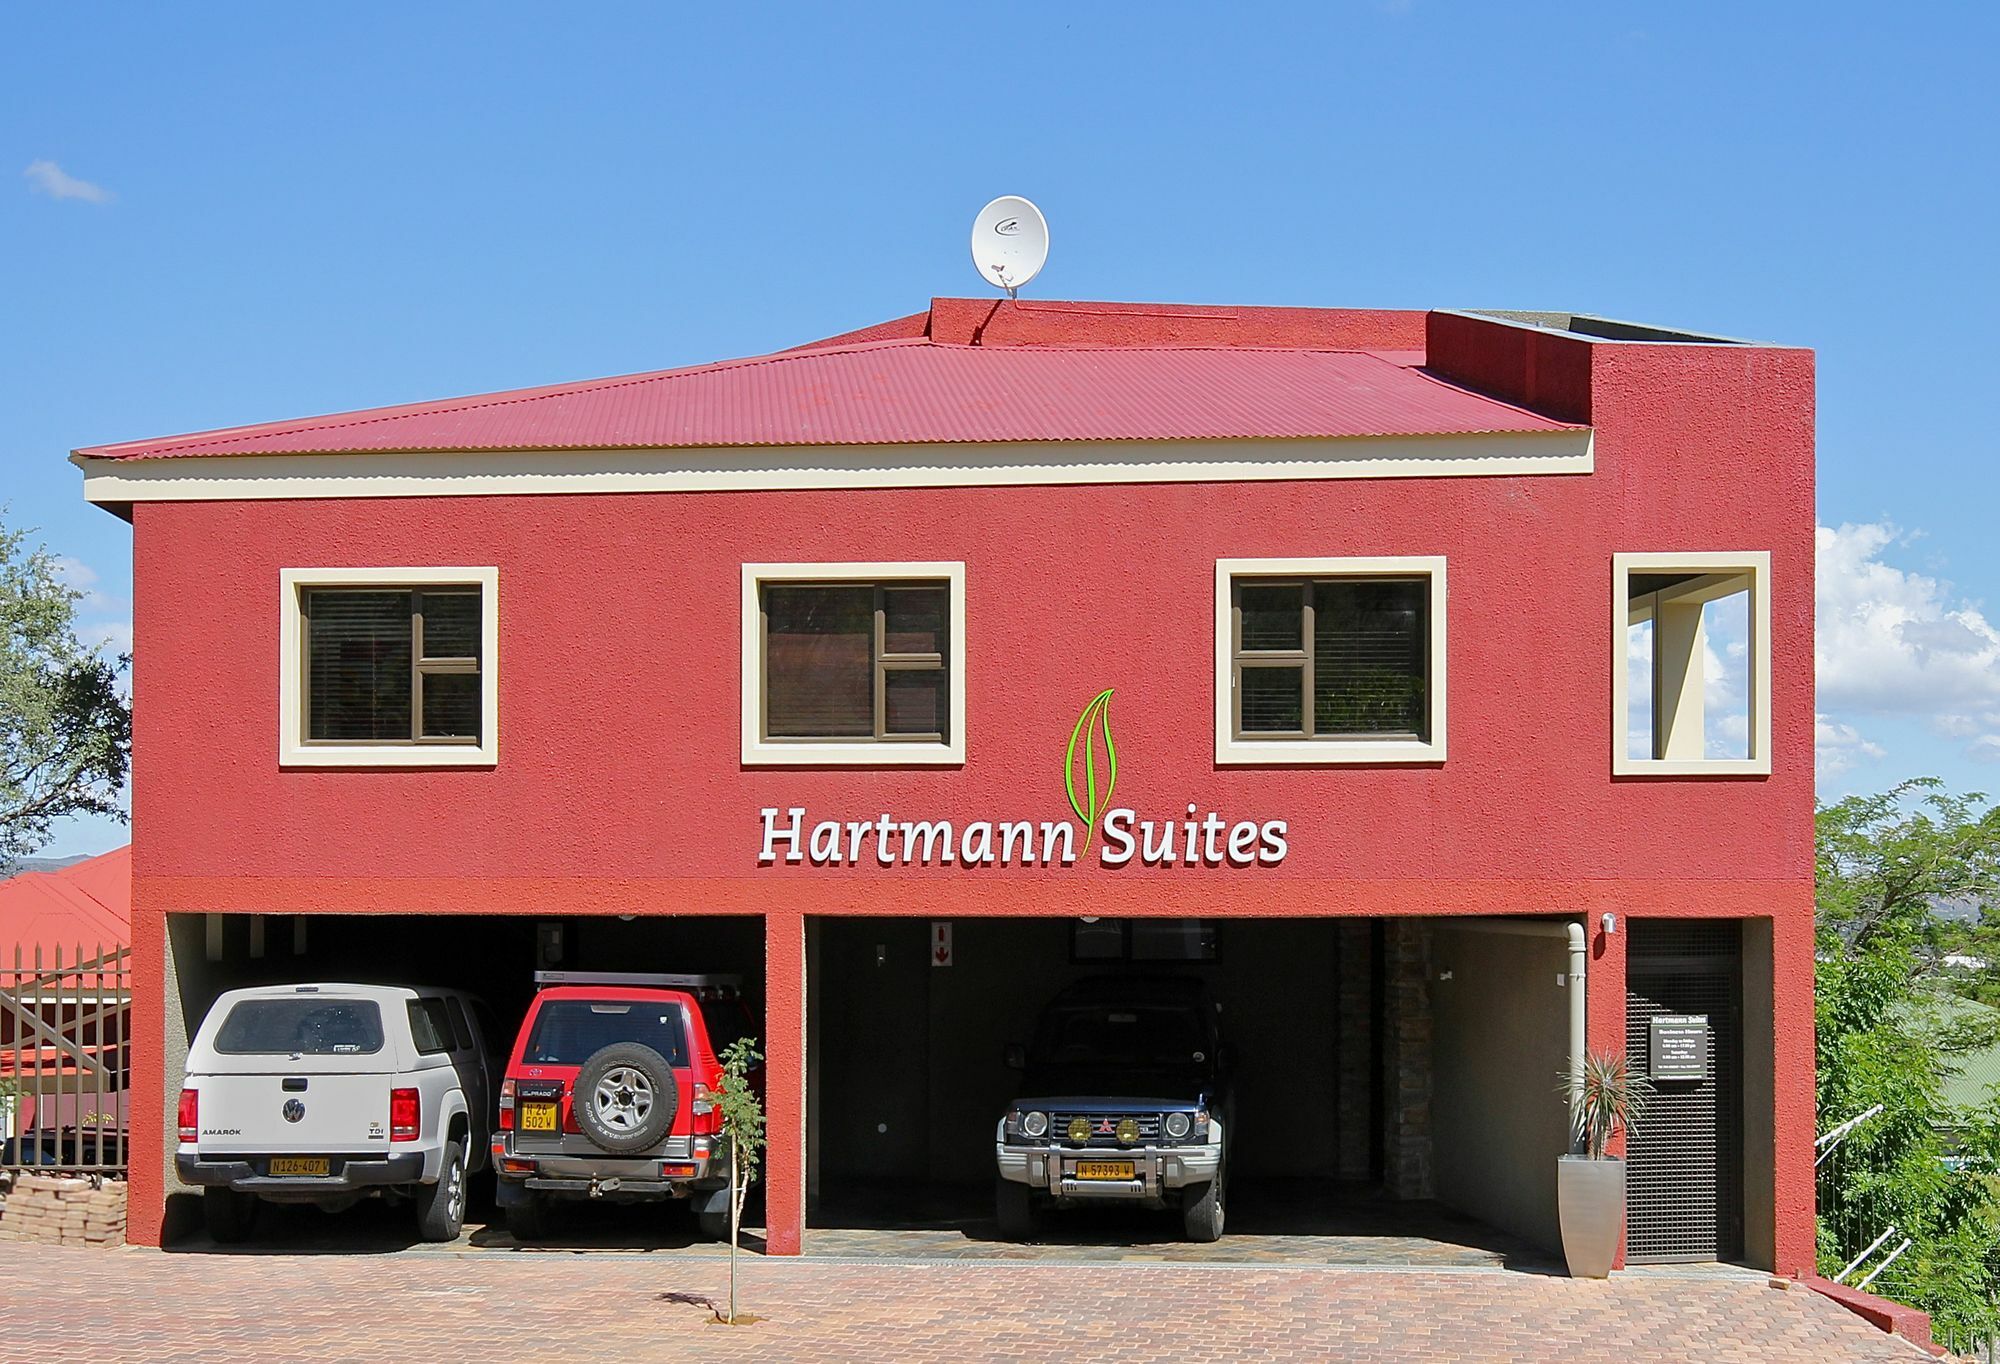 Hartmann Suites Serviced Self-Catering Apartments 温特和克 外观 照片